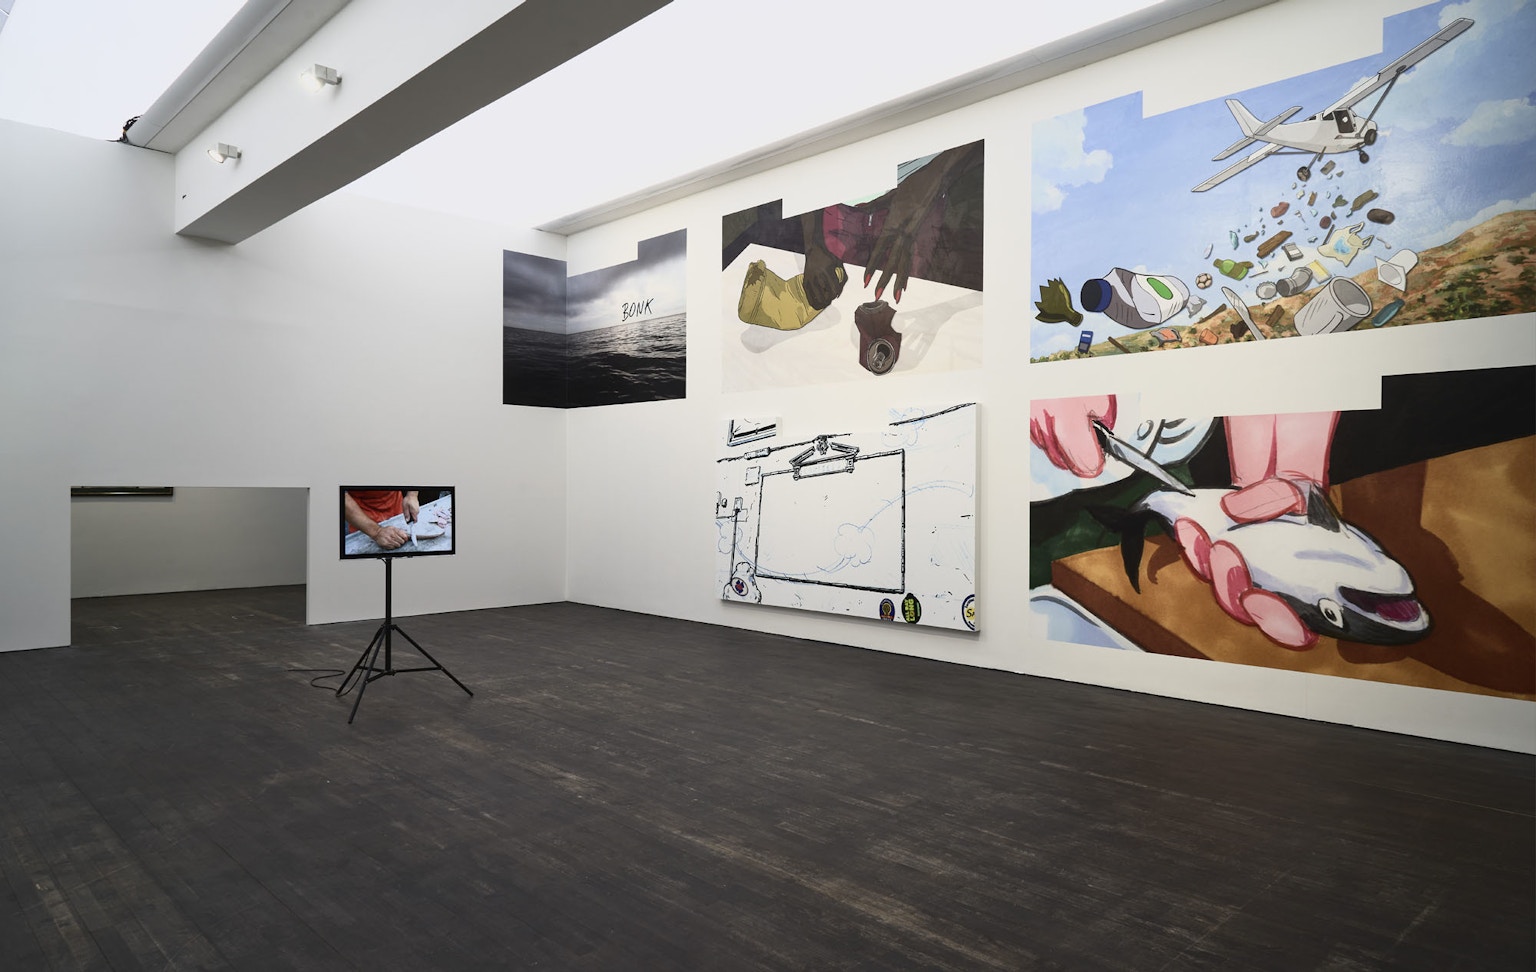 DP Hello are we in the show Installation S M A K 2021 image Dirk Pauwels 26